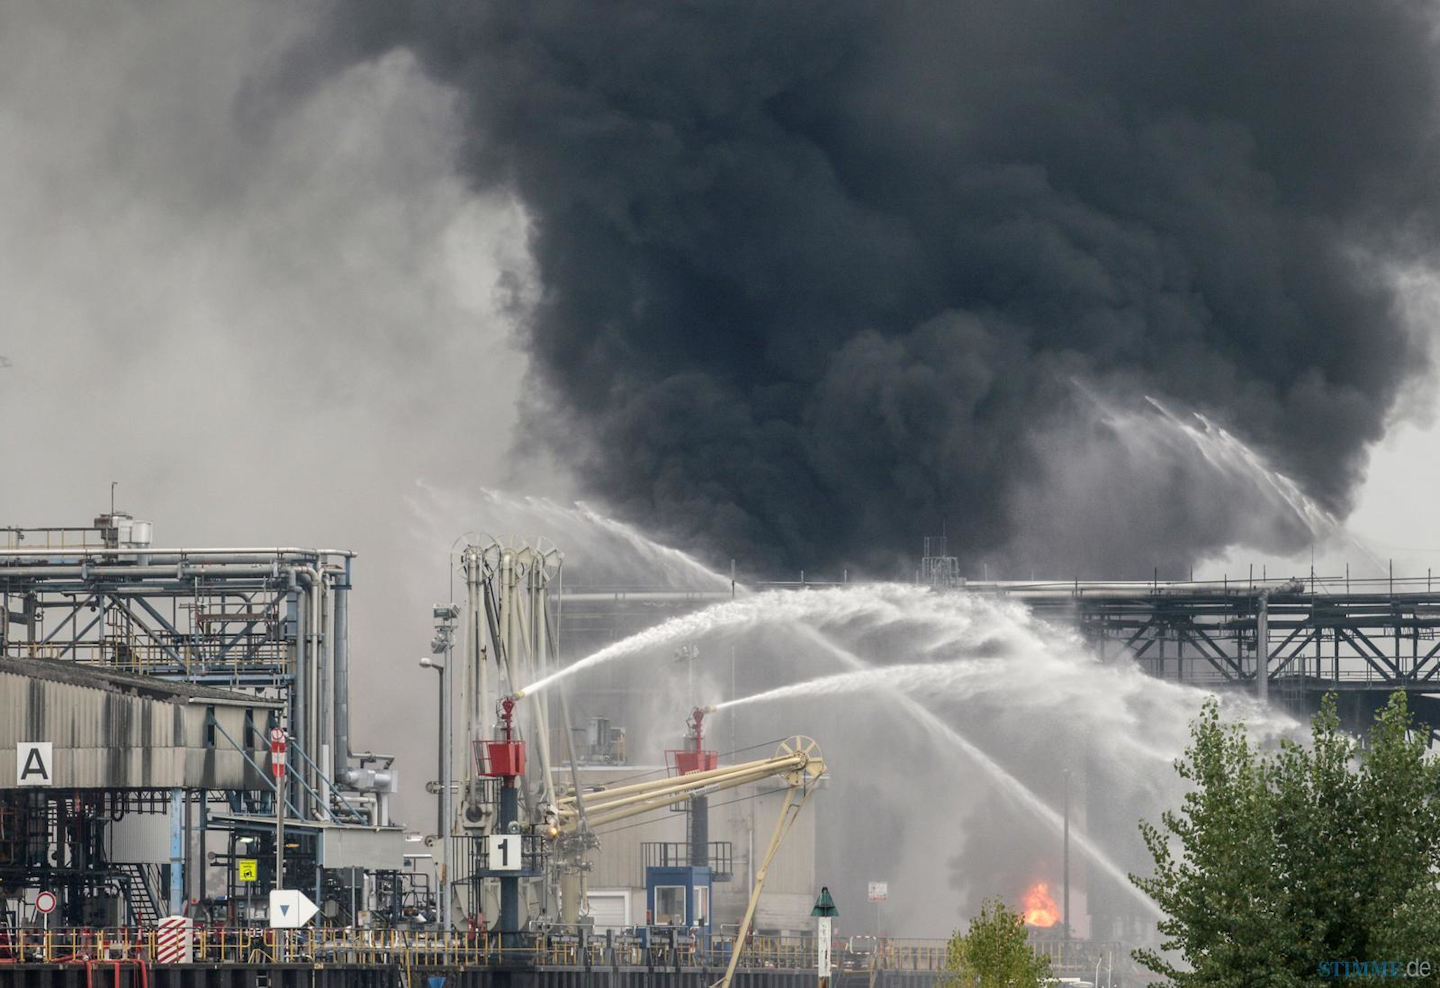 At Least 2 Dead, Several Still Missing After Explosion At BASF Facility ...